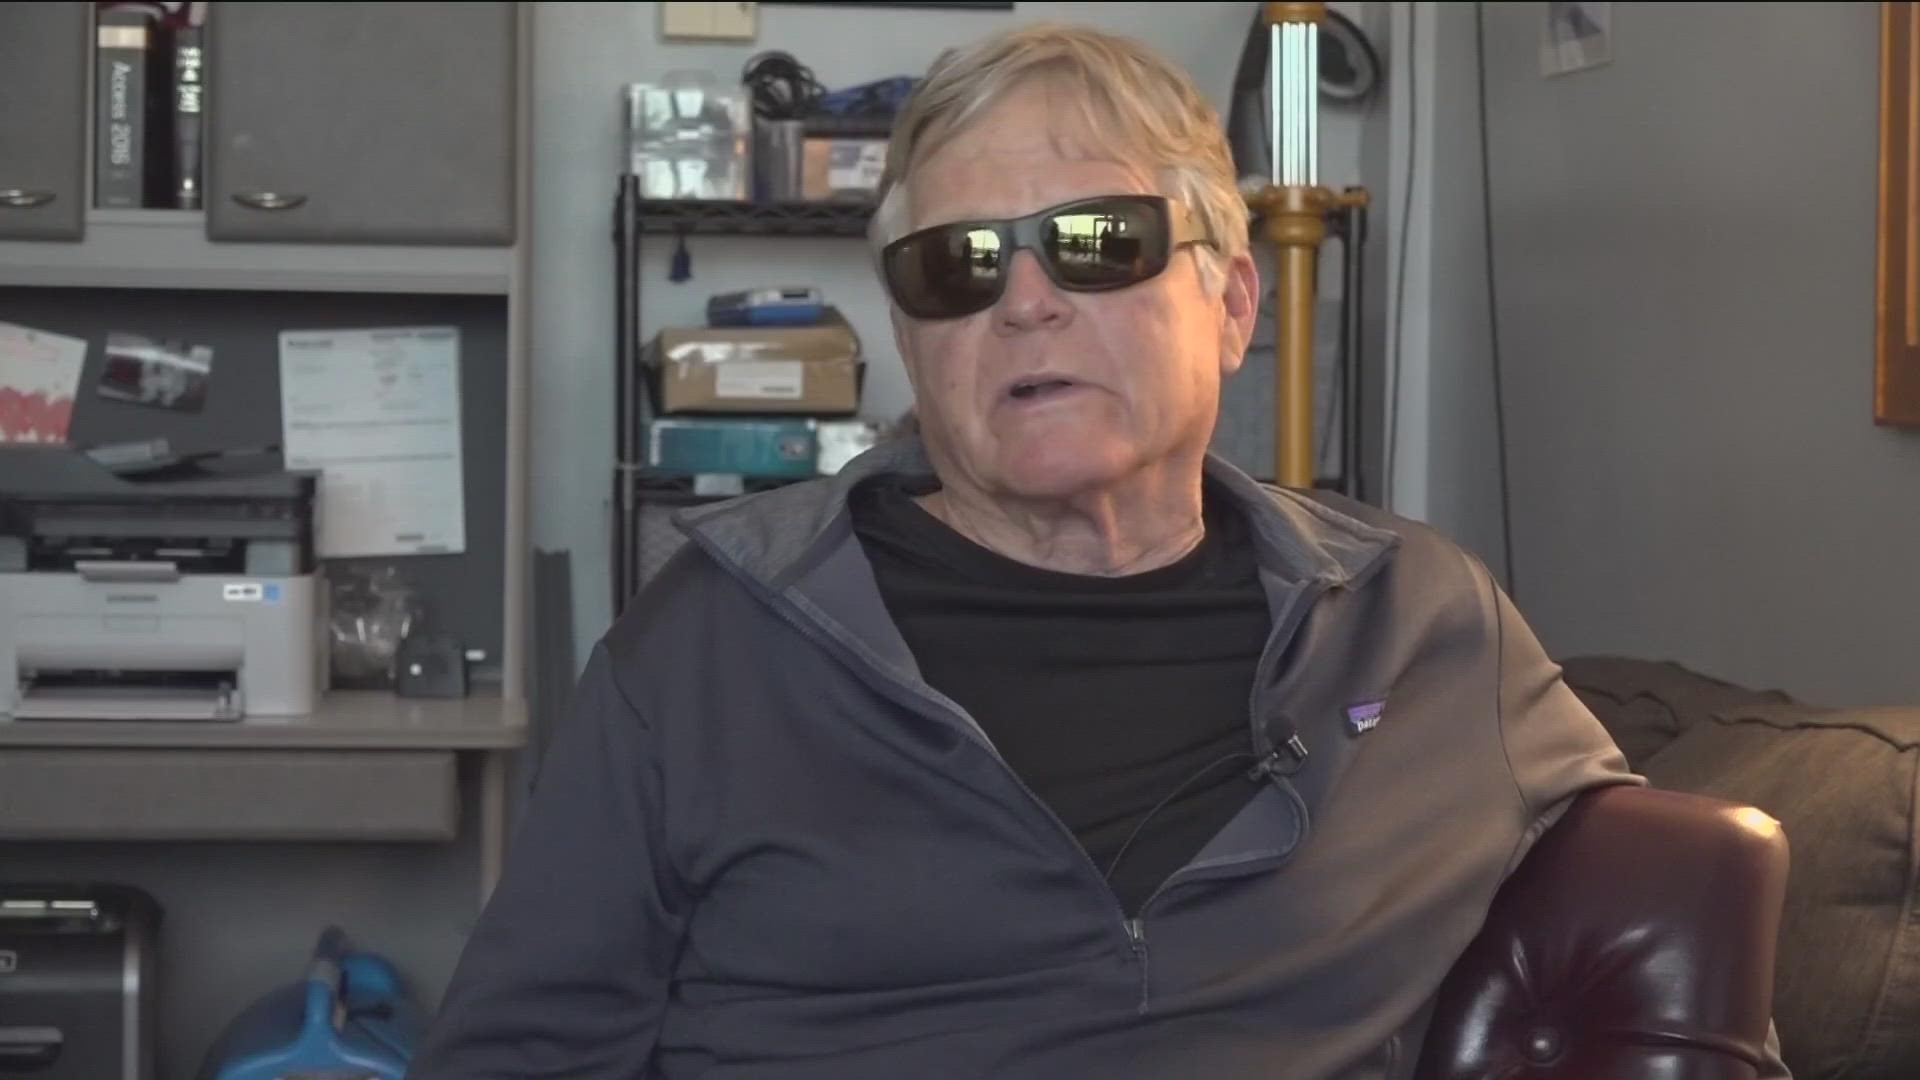 From open water to a dark room | San Diego sailing icon says he was blinded  after an eye surgeon used dirty instruments 